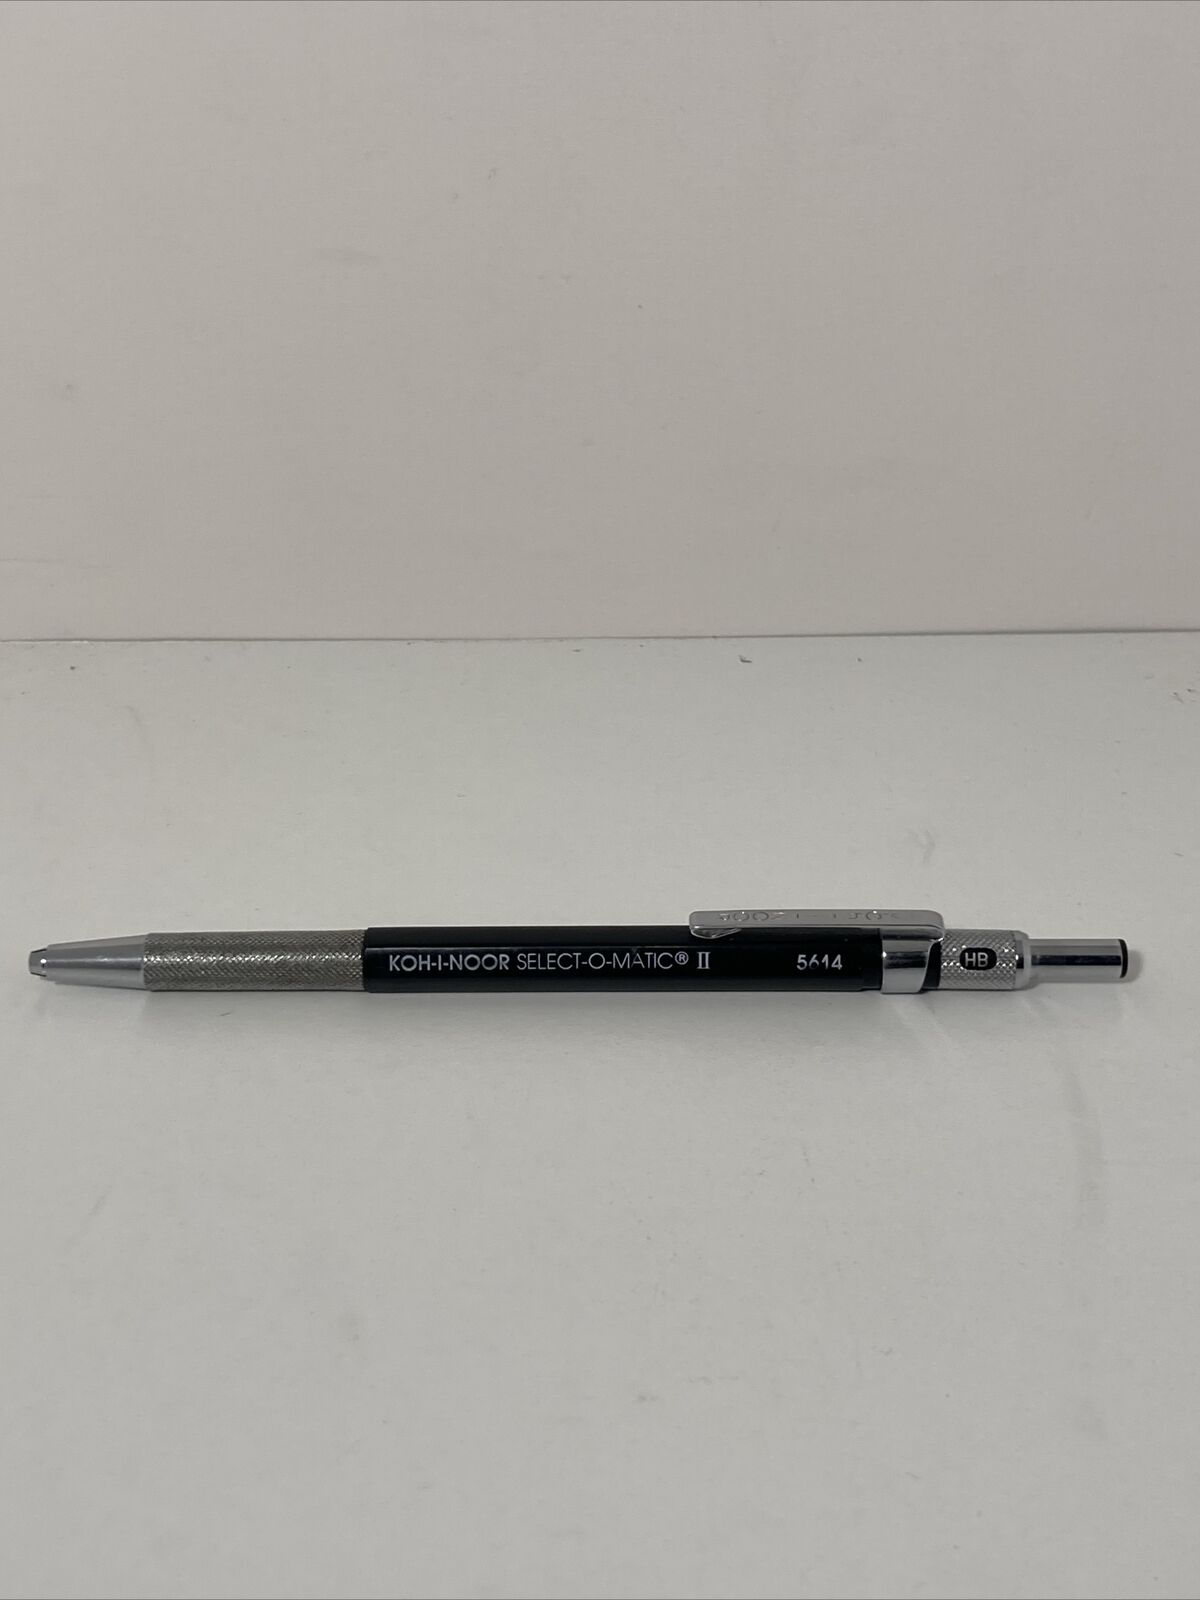 Rare Vintage Koh-I-Noor Select-O-Matic II 5614 Mechanical Pencil Made In Japan